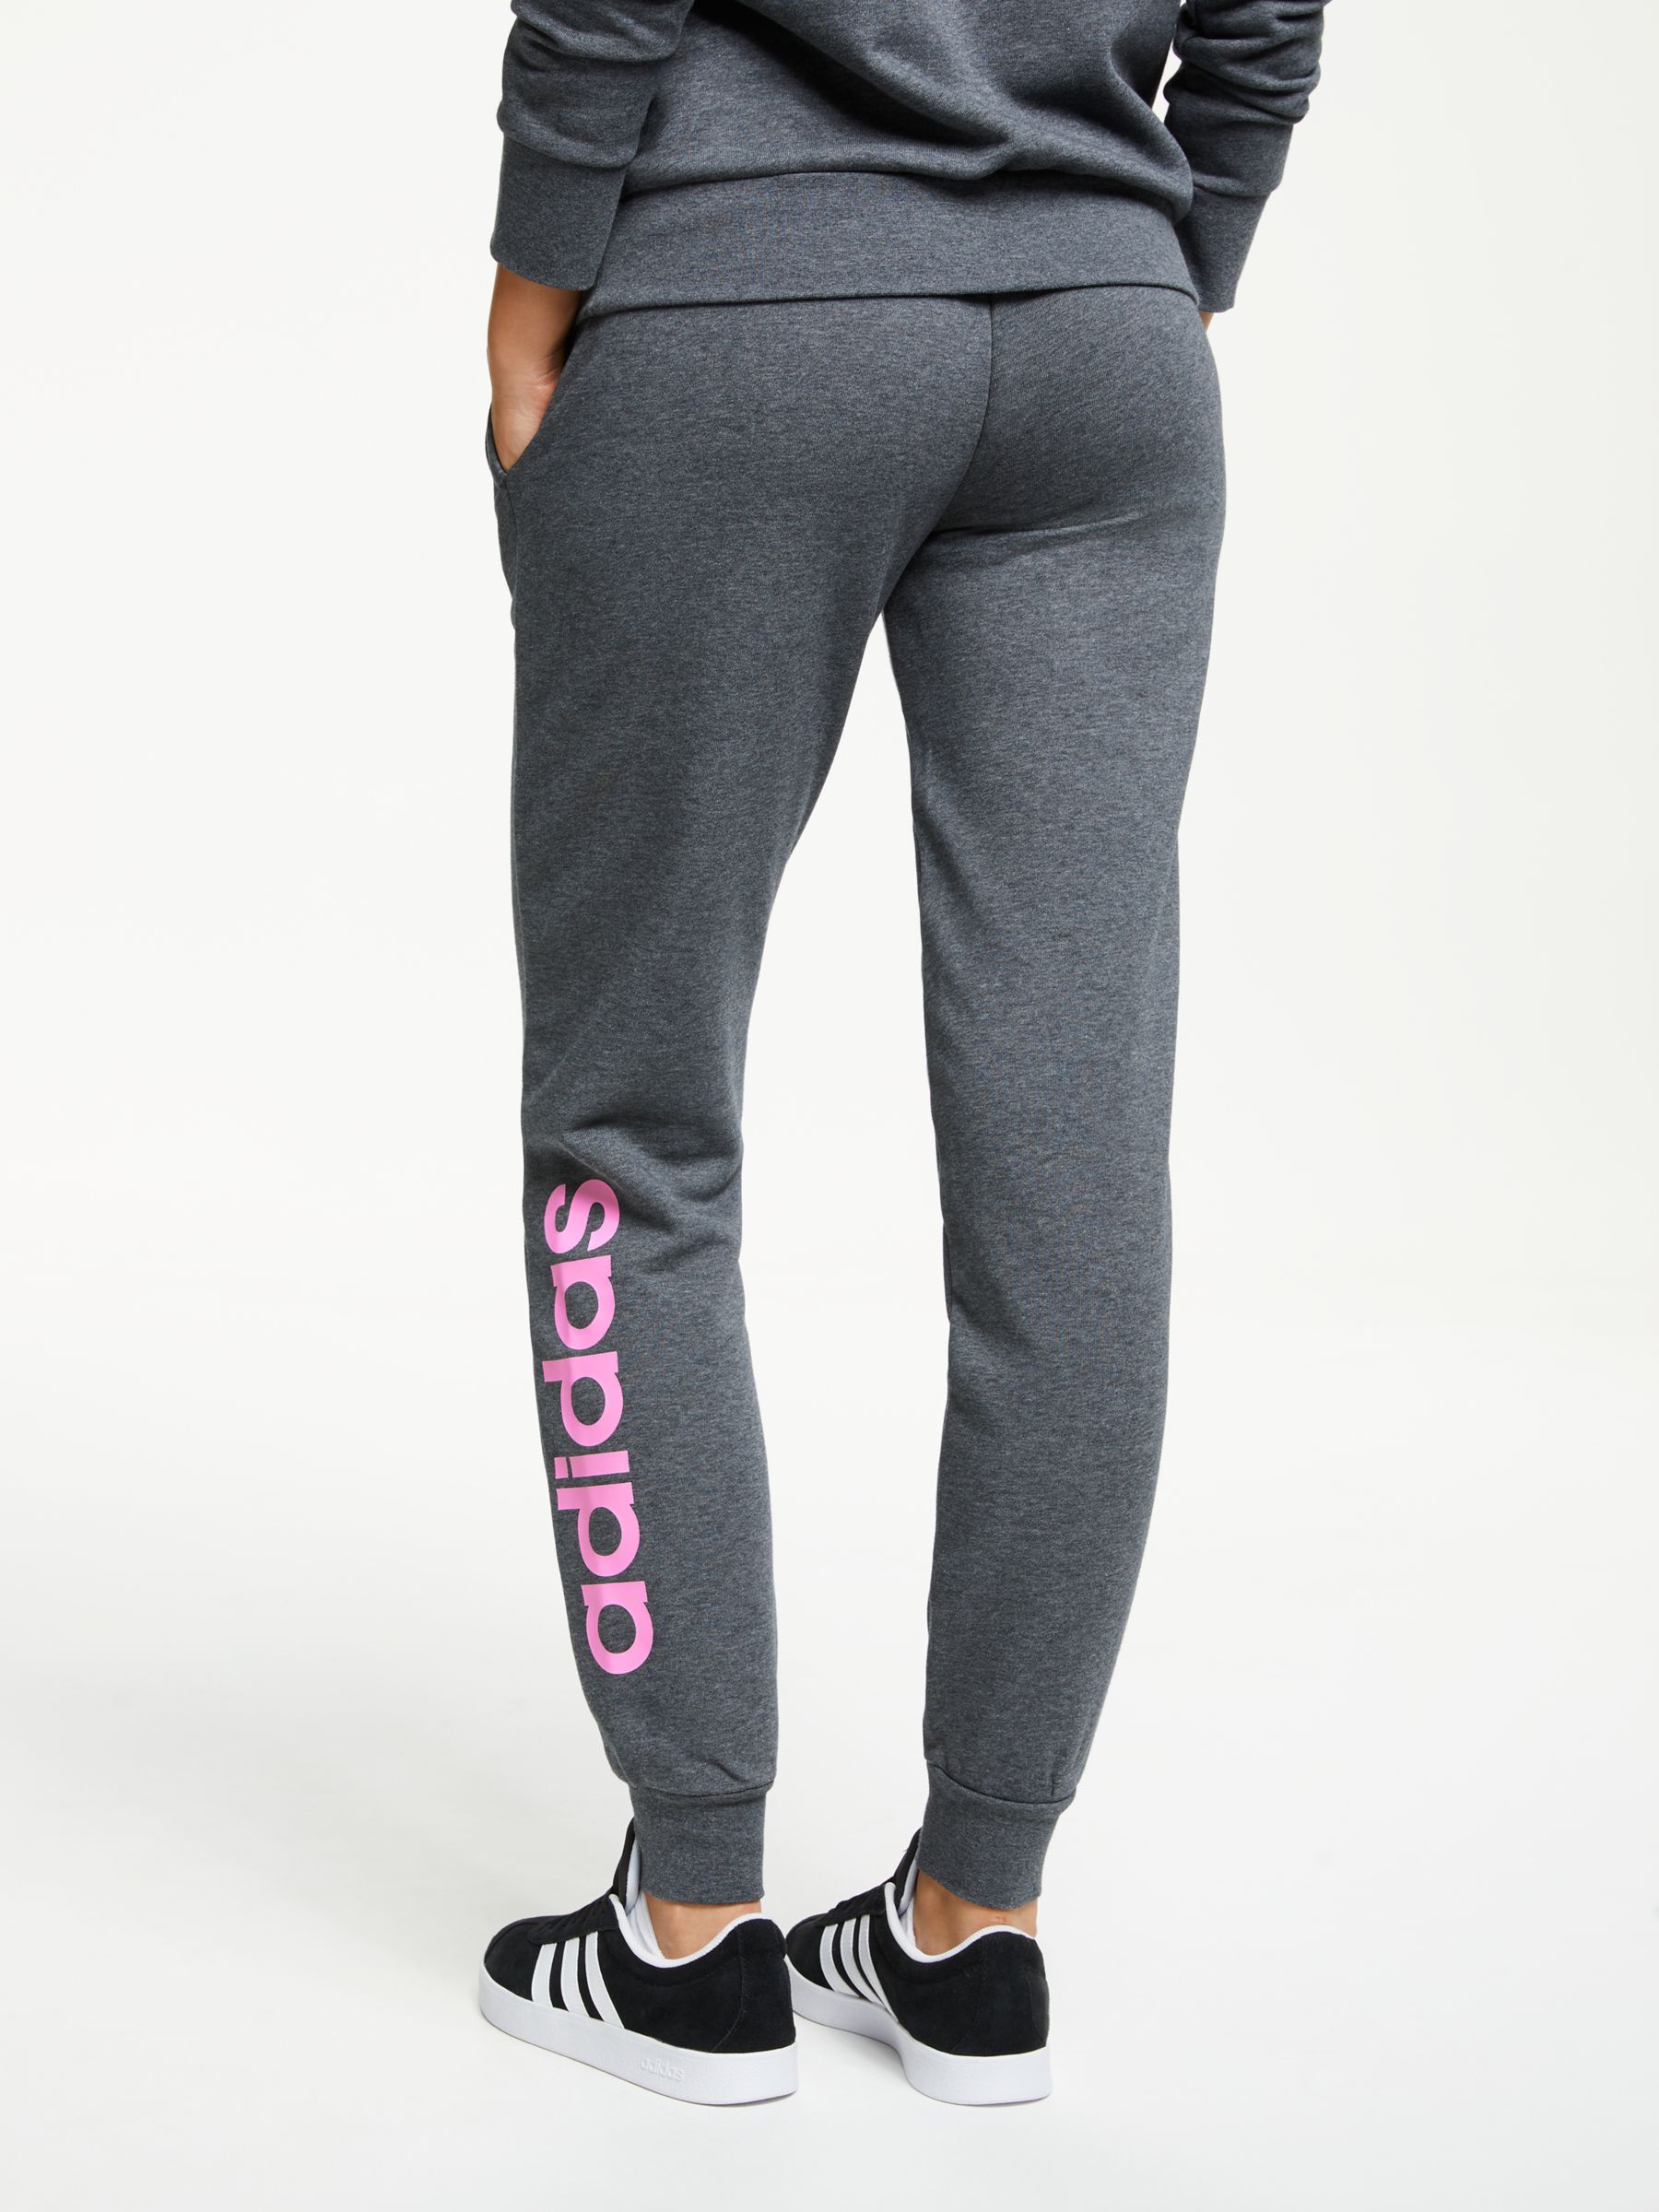 grey and pink adidas tracksuit